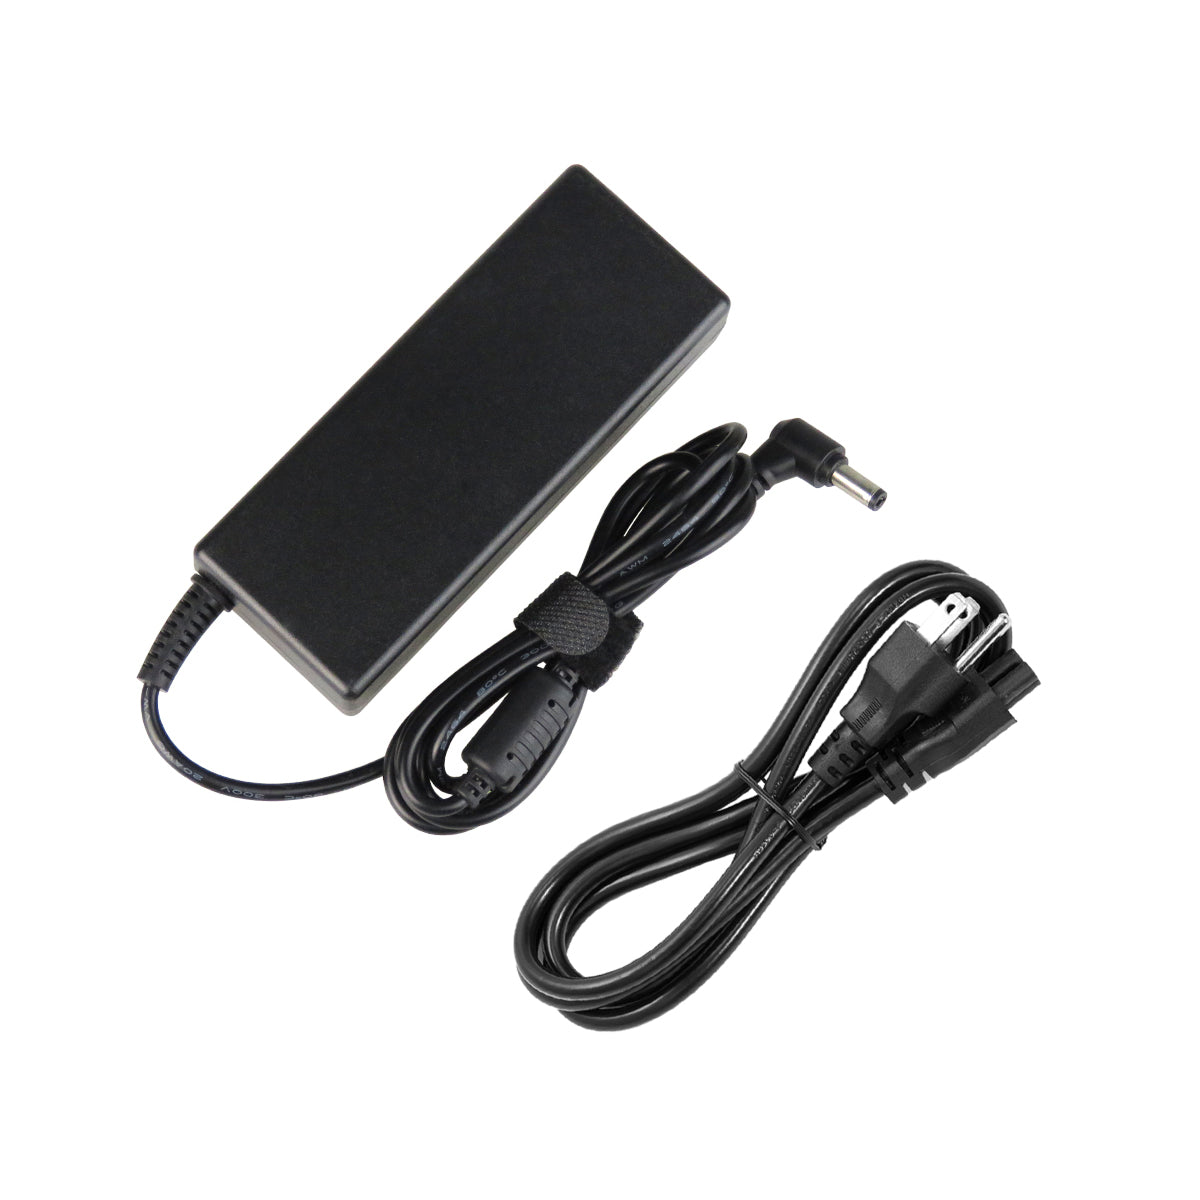 AC Adapter Charger for ASUS N46VM Notebook.